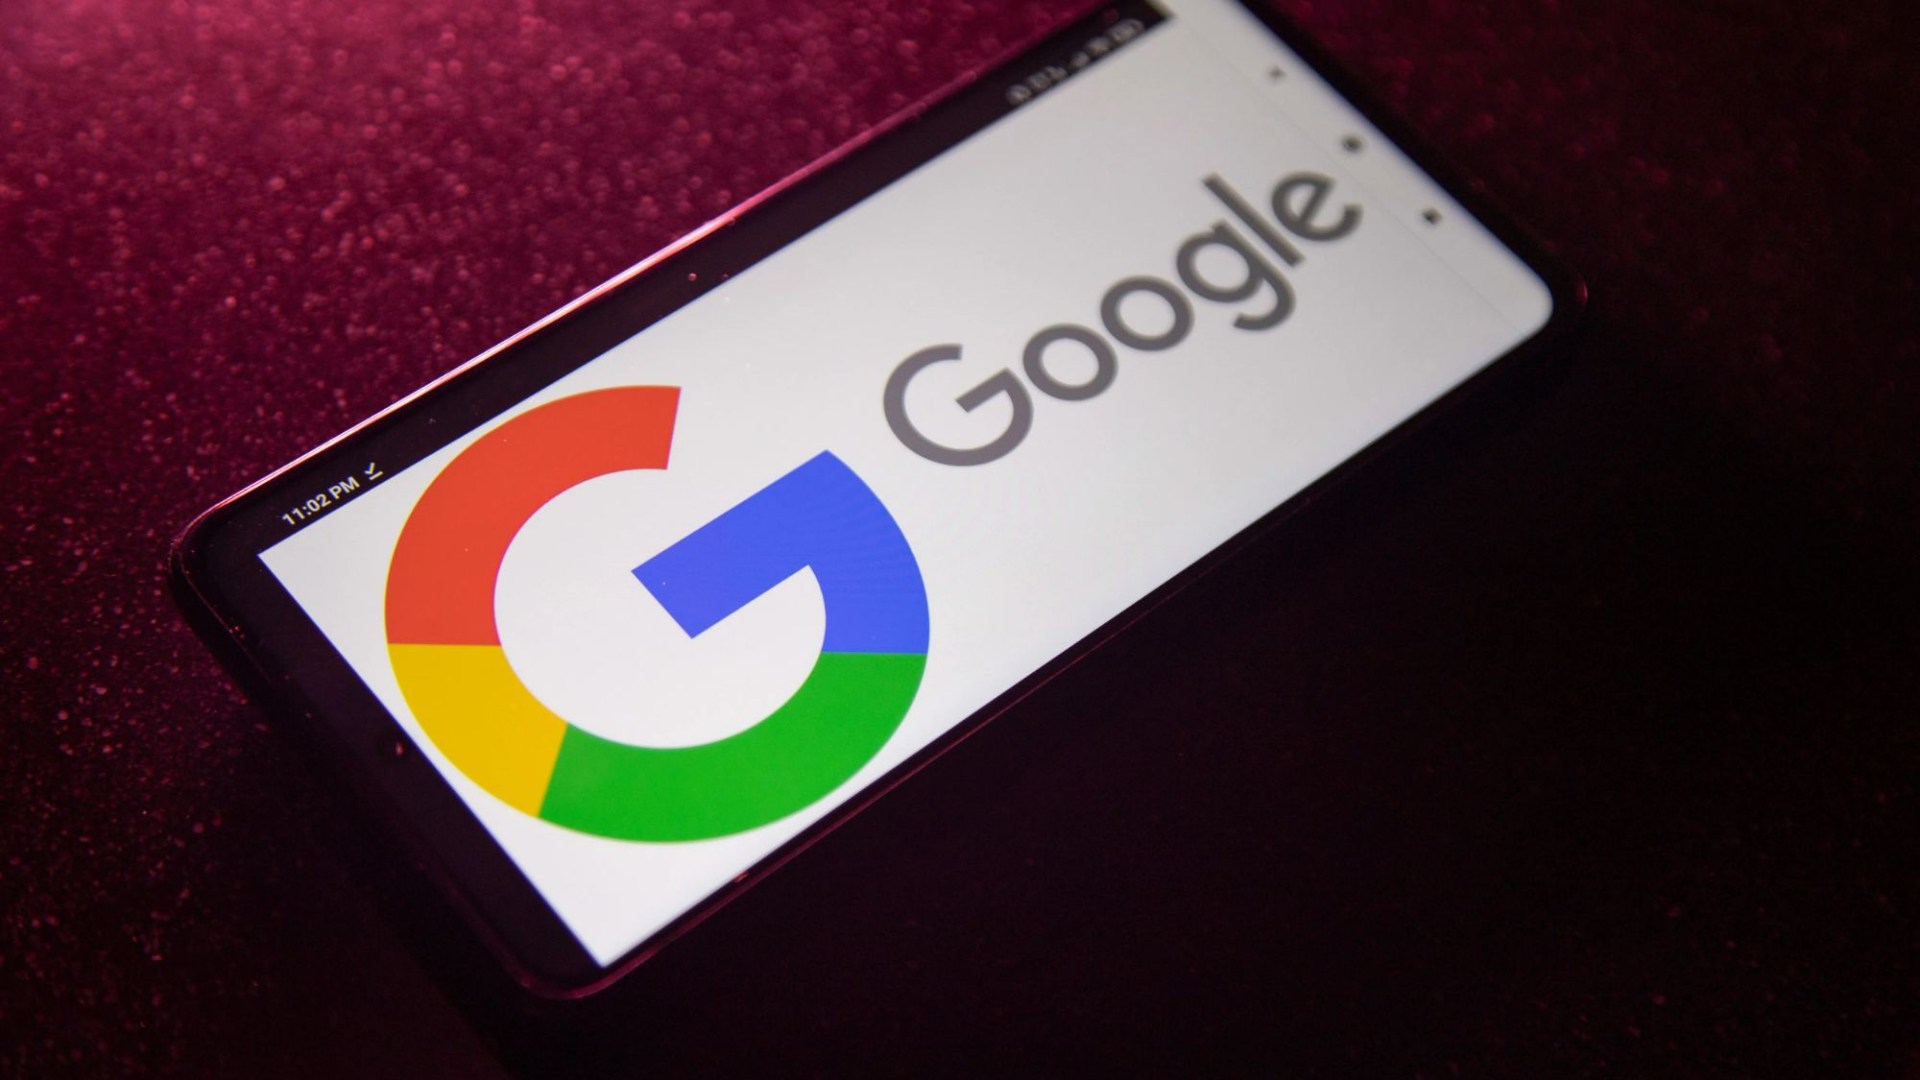 Android Users Devastated as Favorite Free Google App Faces Imminent Closure – Act Fast!